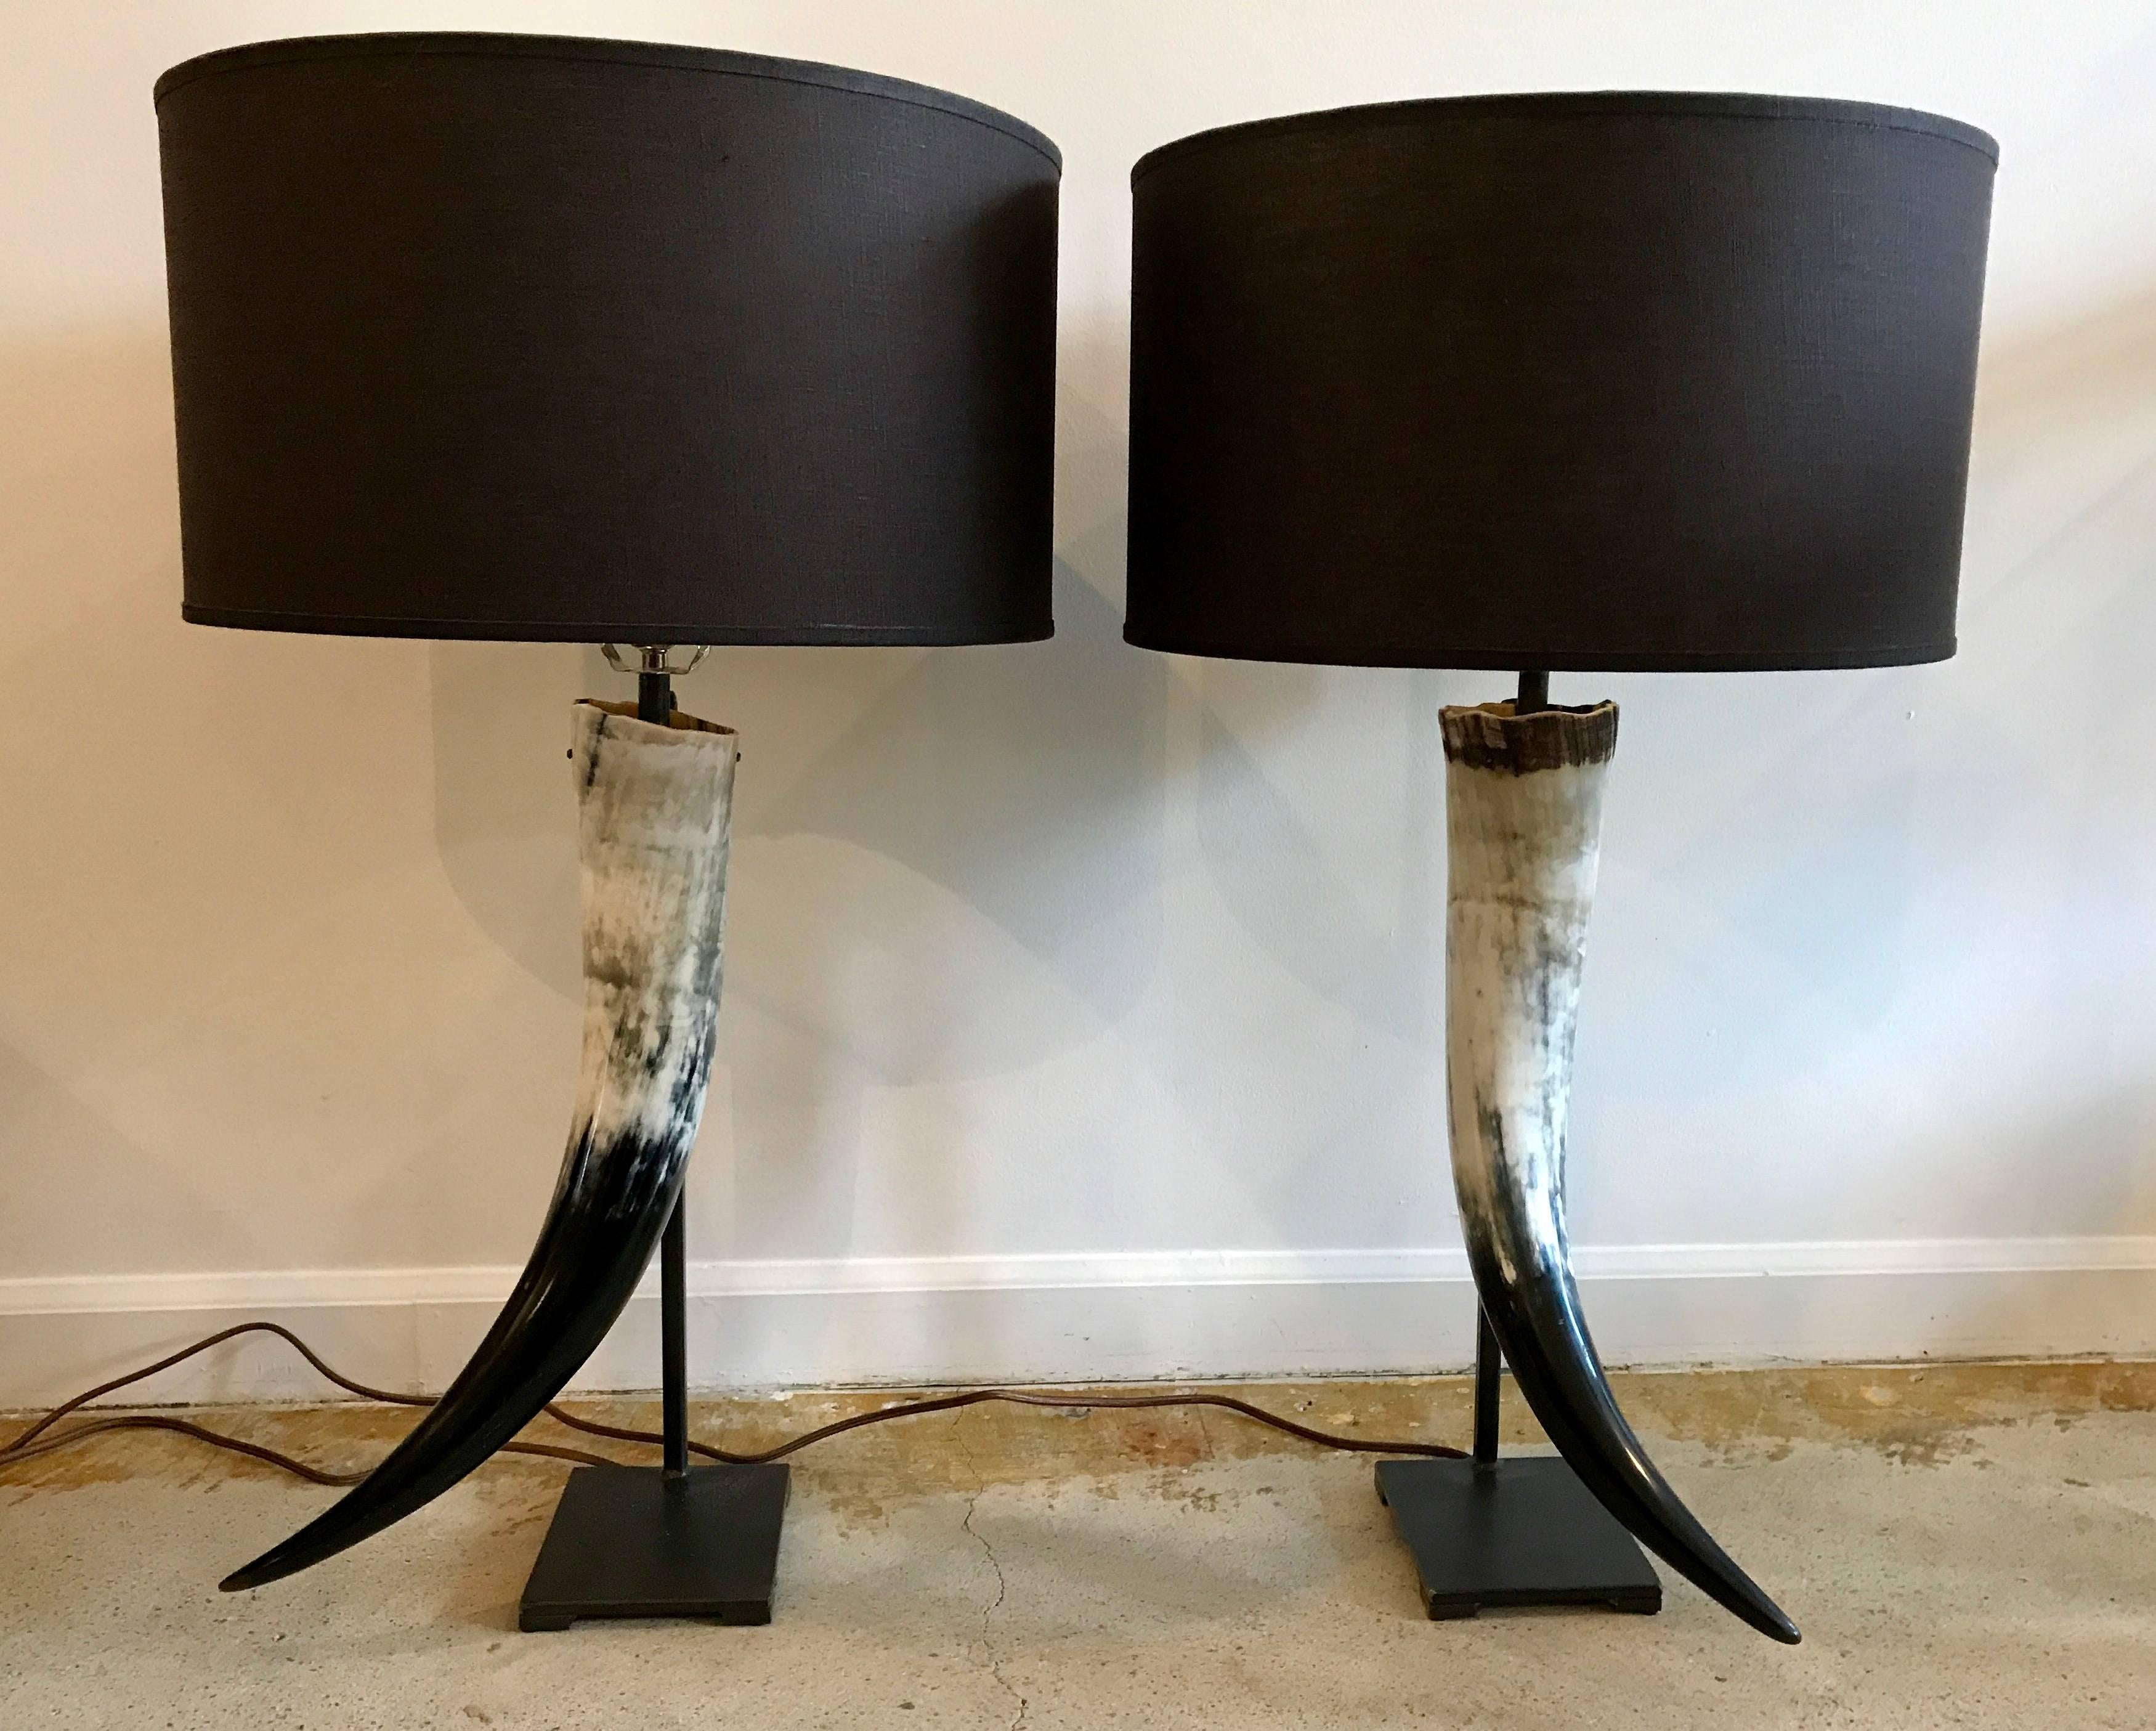 Fantastic contemporary pair of authentic Texas Longhorn table lamps, artisan crafted. Beautiful black and white horns mounted on blackened steel bases. Rewired with three-way sockets.